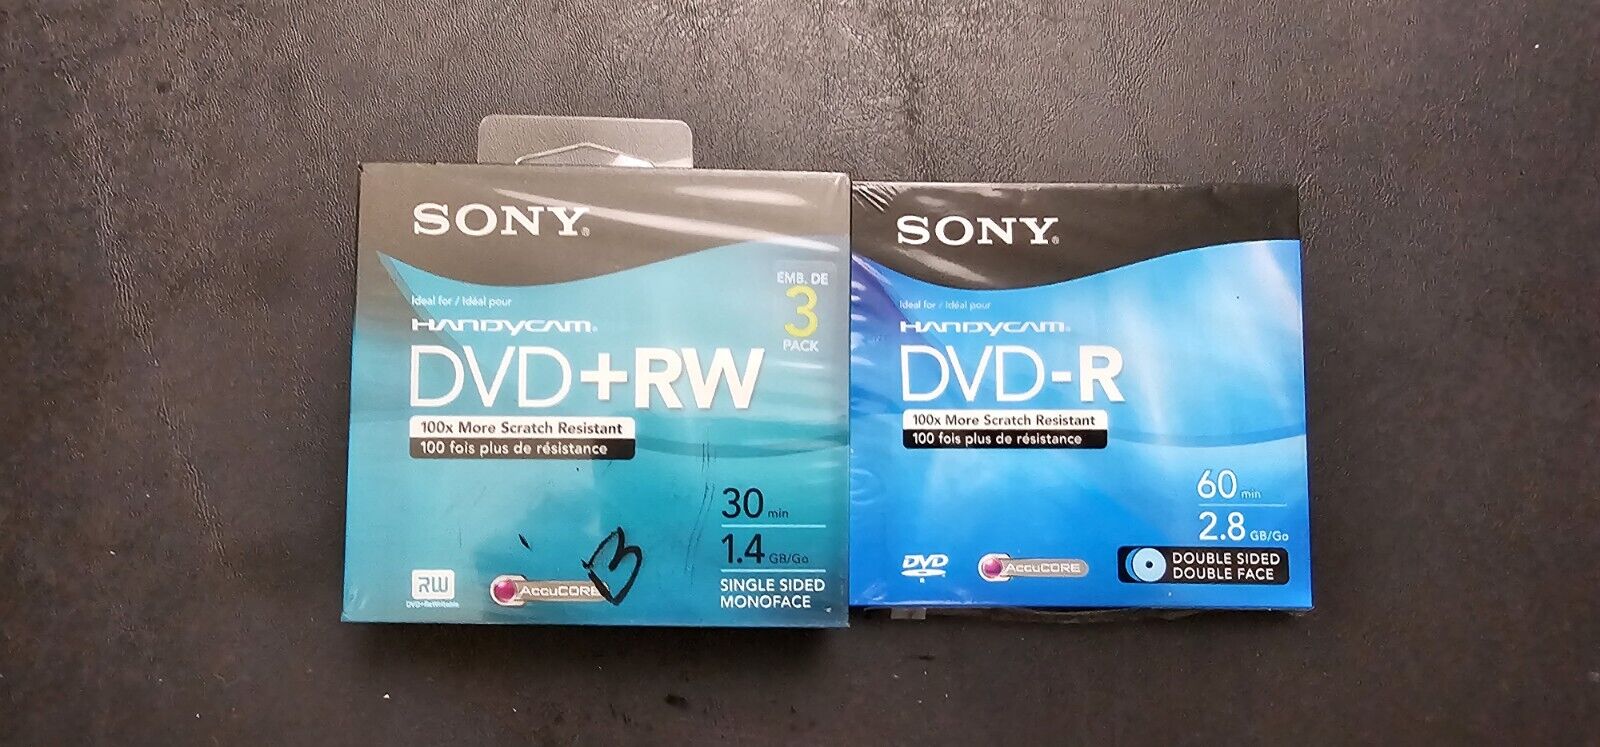 Sony HandyCam DVD+RW 30 Minute  Video Disc And Dvd-r 60 Min Included.